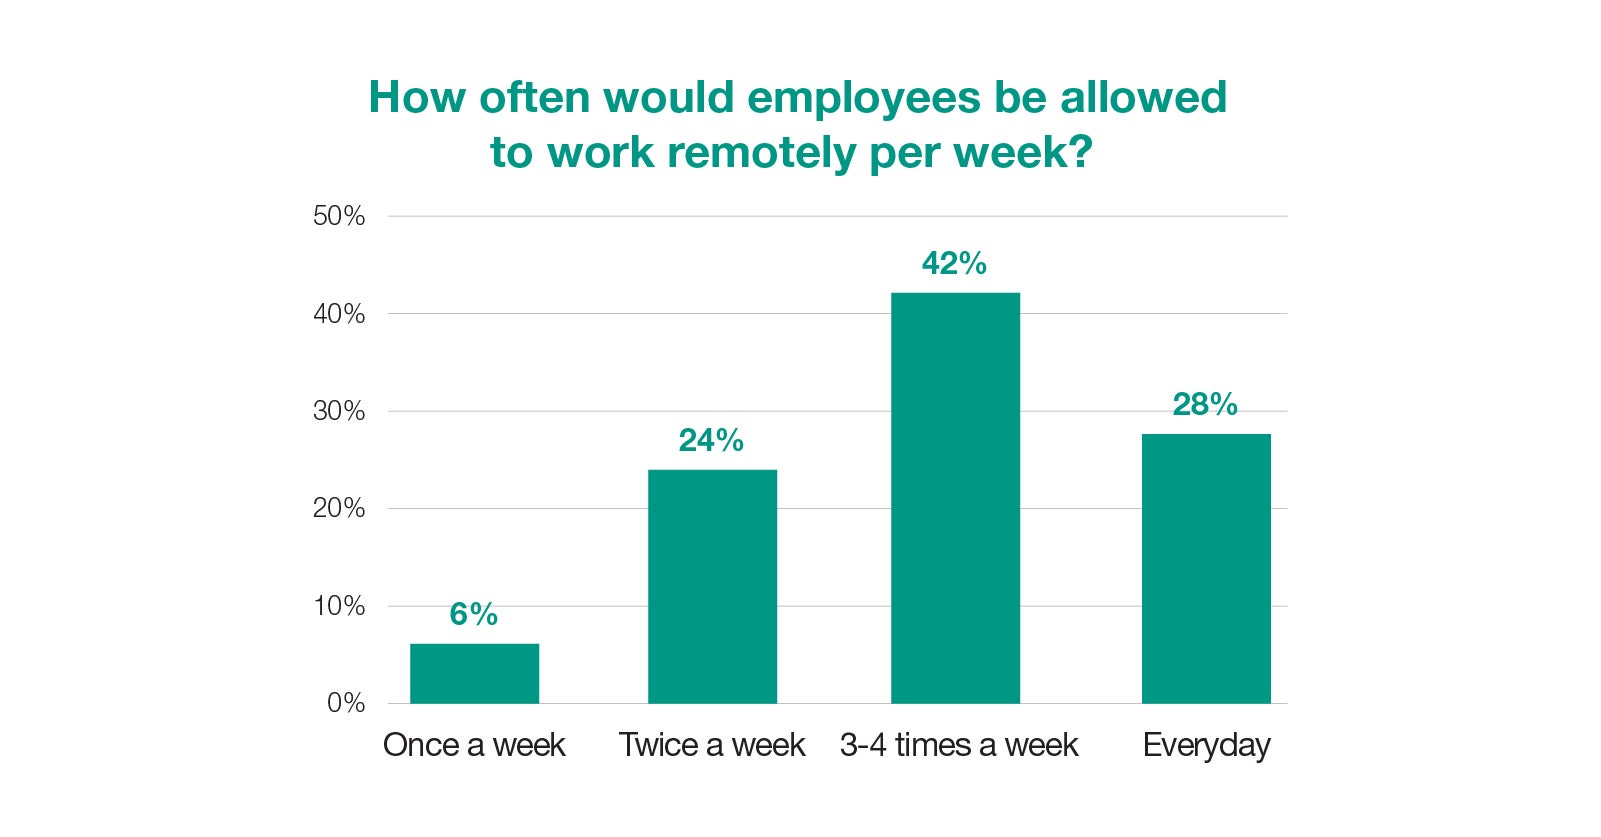 How often would employees be allowed to work remotely per week?